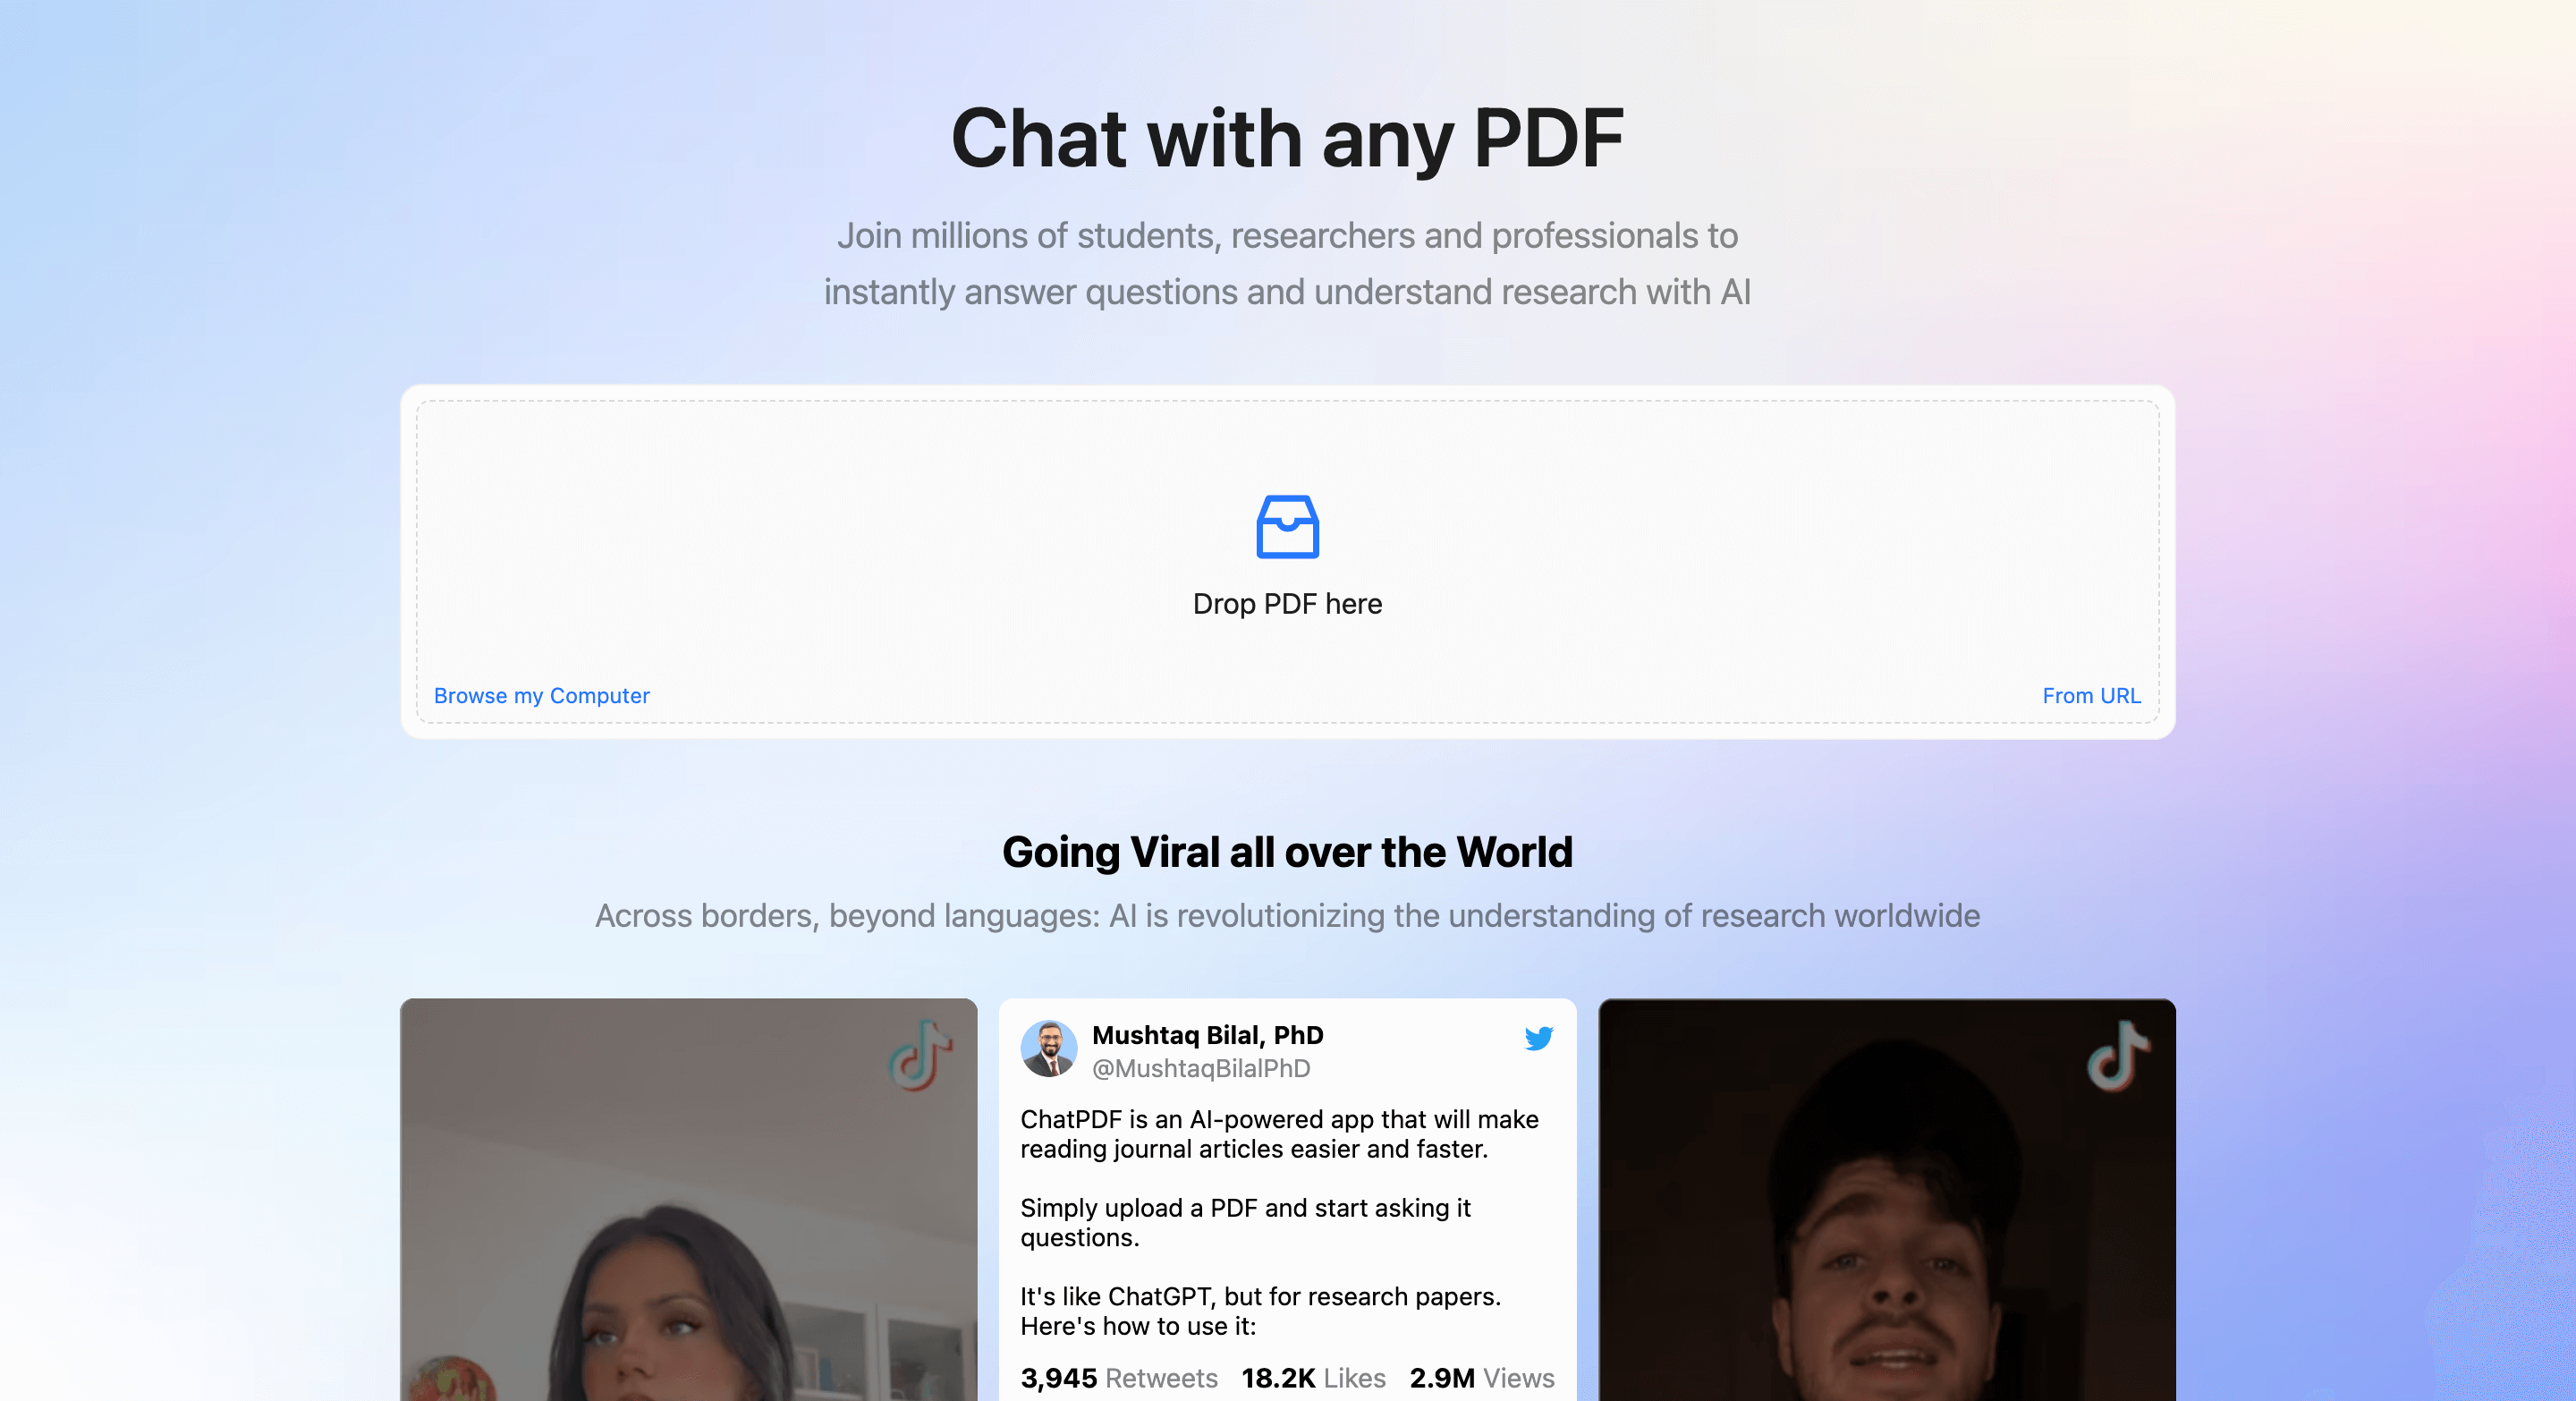 ChatPDF - Chat with any PDF